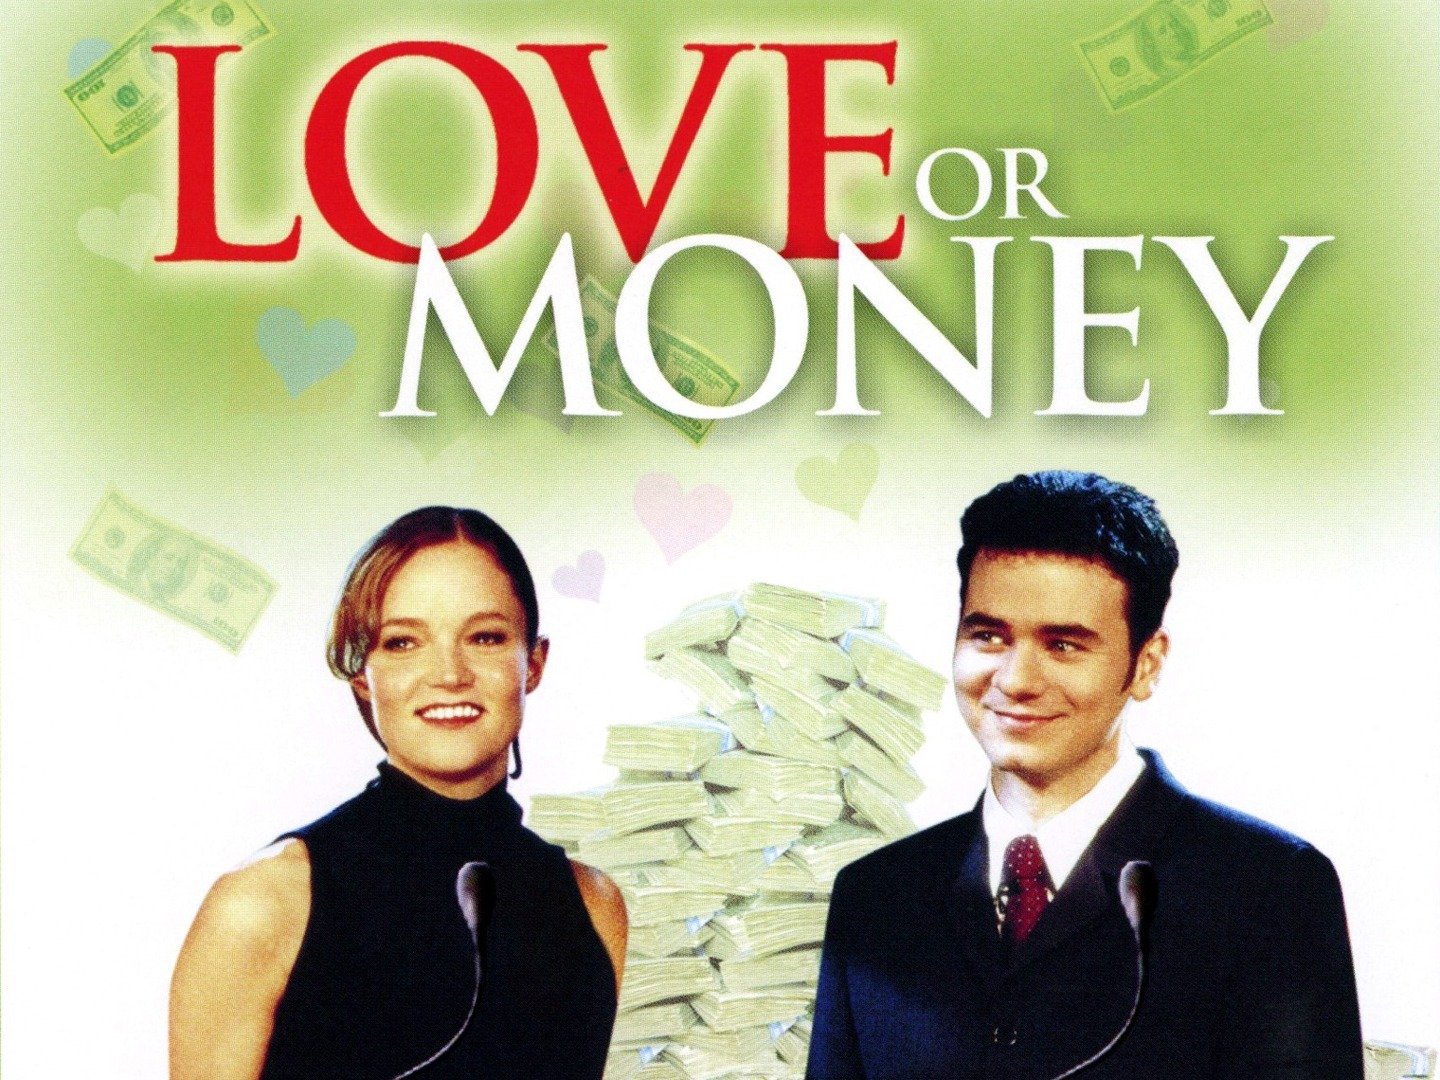 love or money movie review